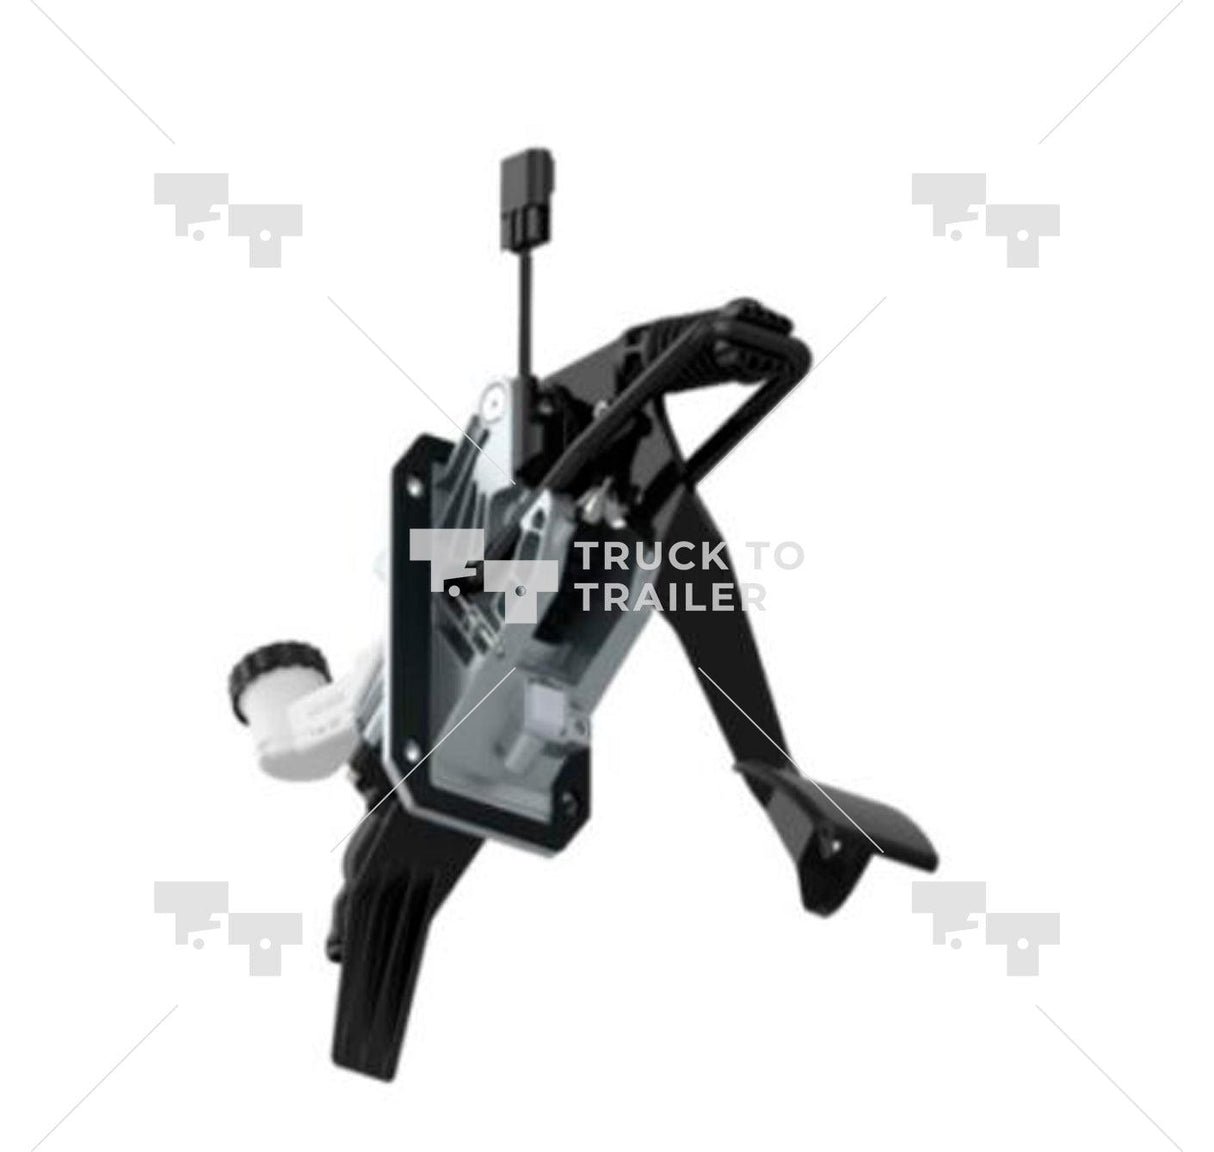 9650012080 S9650012080 Oem Wabco Hydraulic Clutch Pedal Assembly.